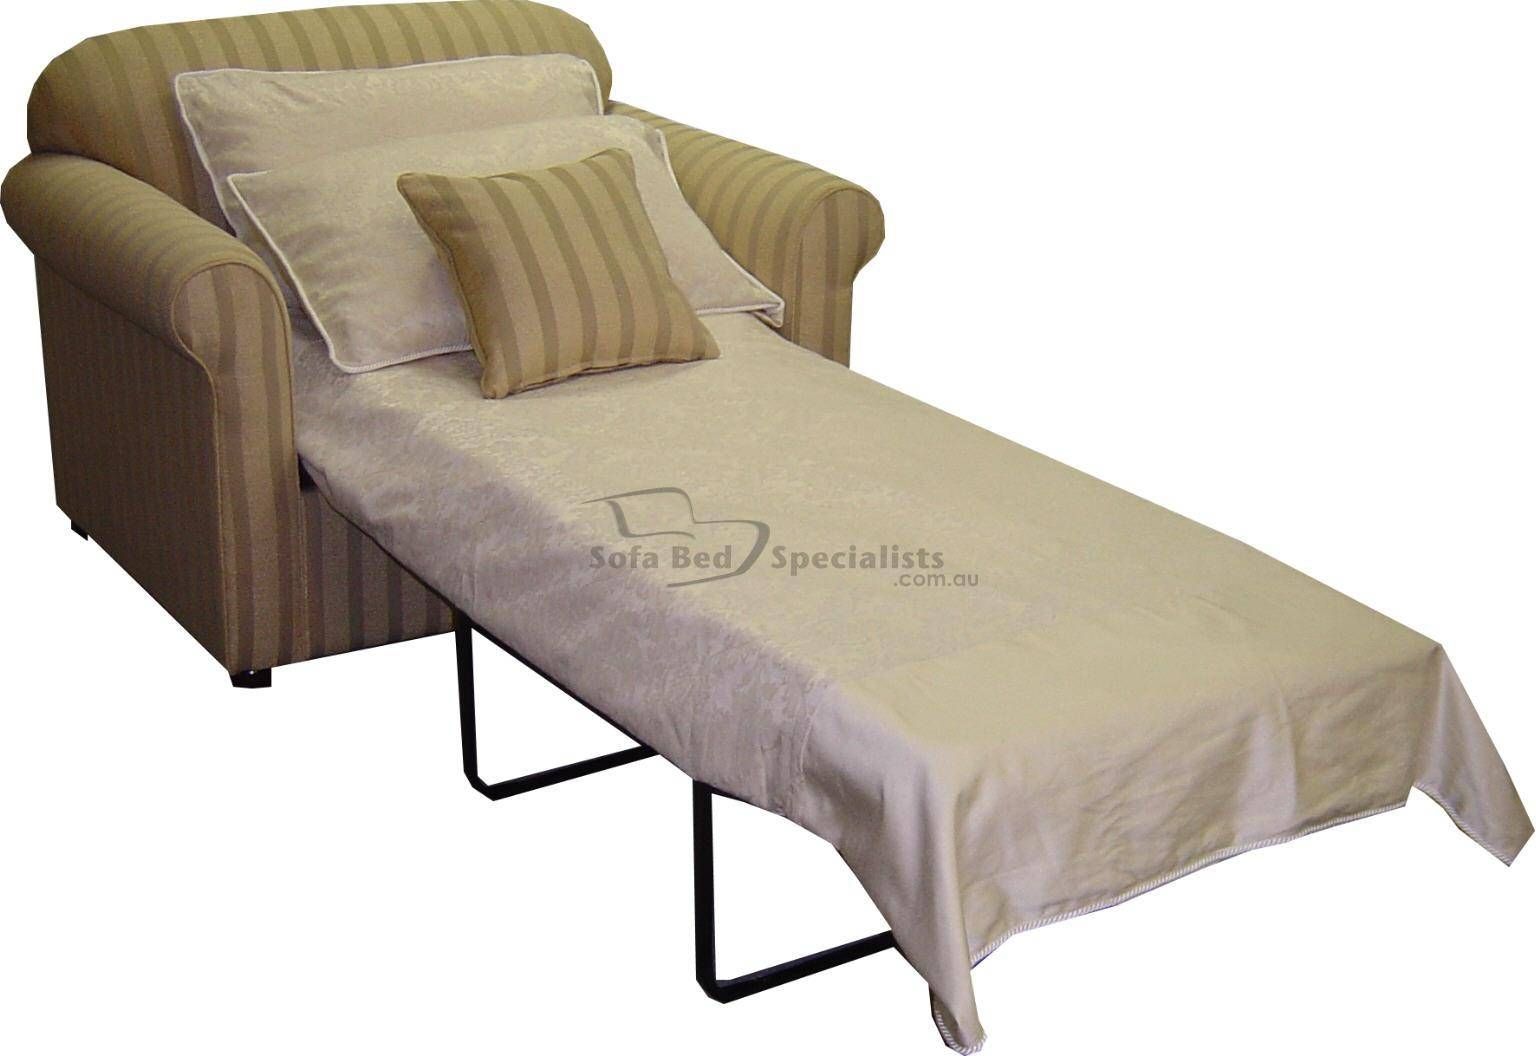 Chair Sofabed Victoria – Sofa Bed Specialists Inside Single Sofa Bed Chairs (View 3 of 15)